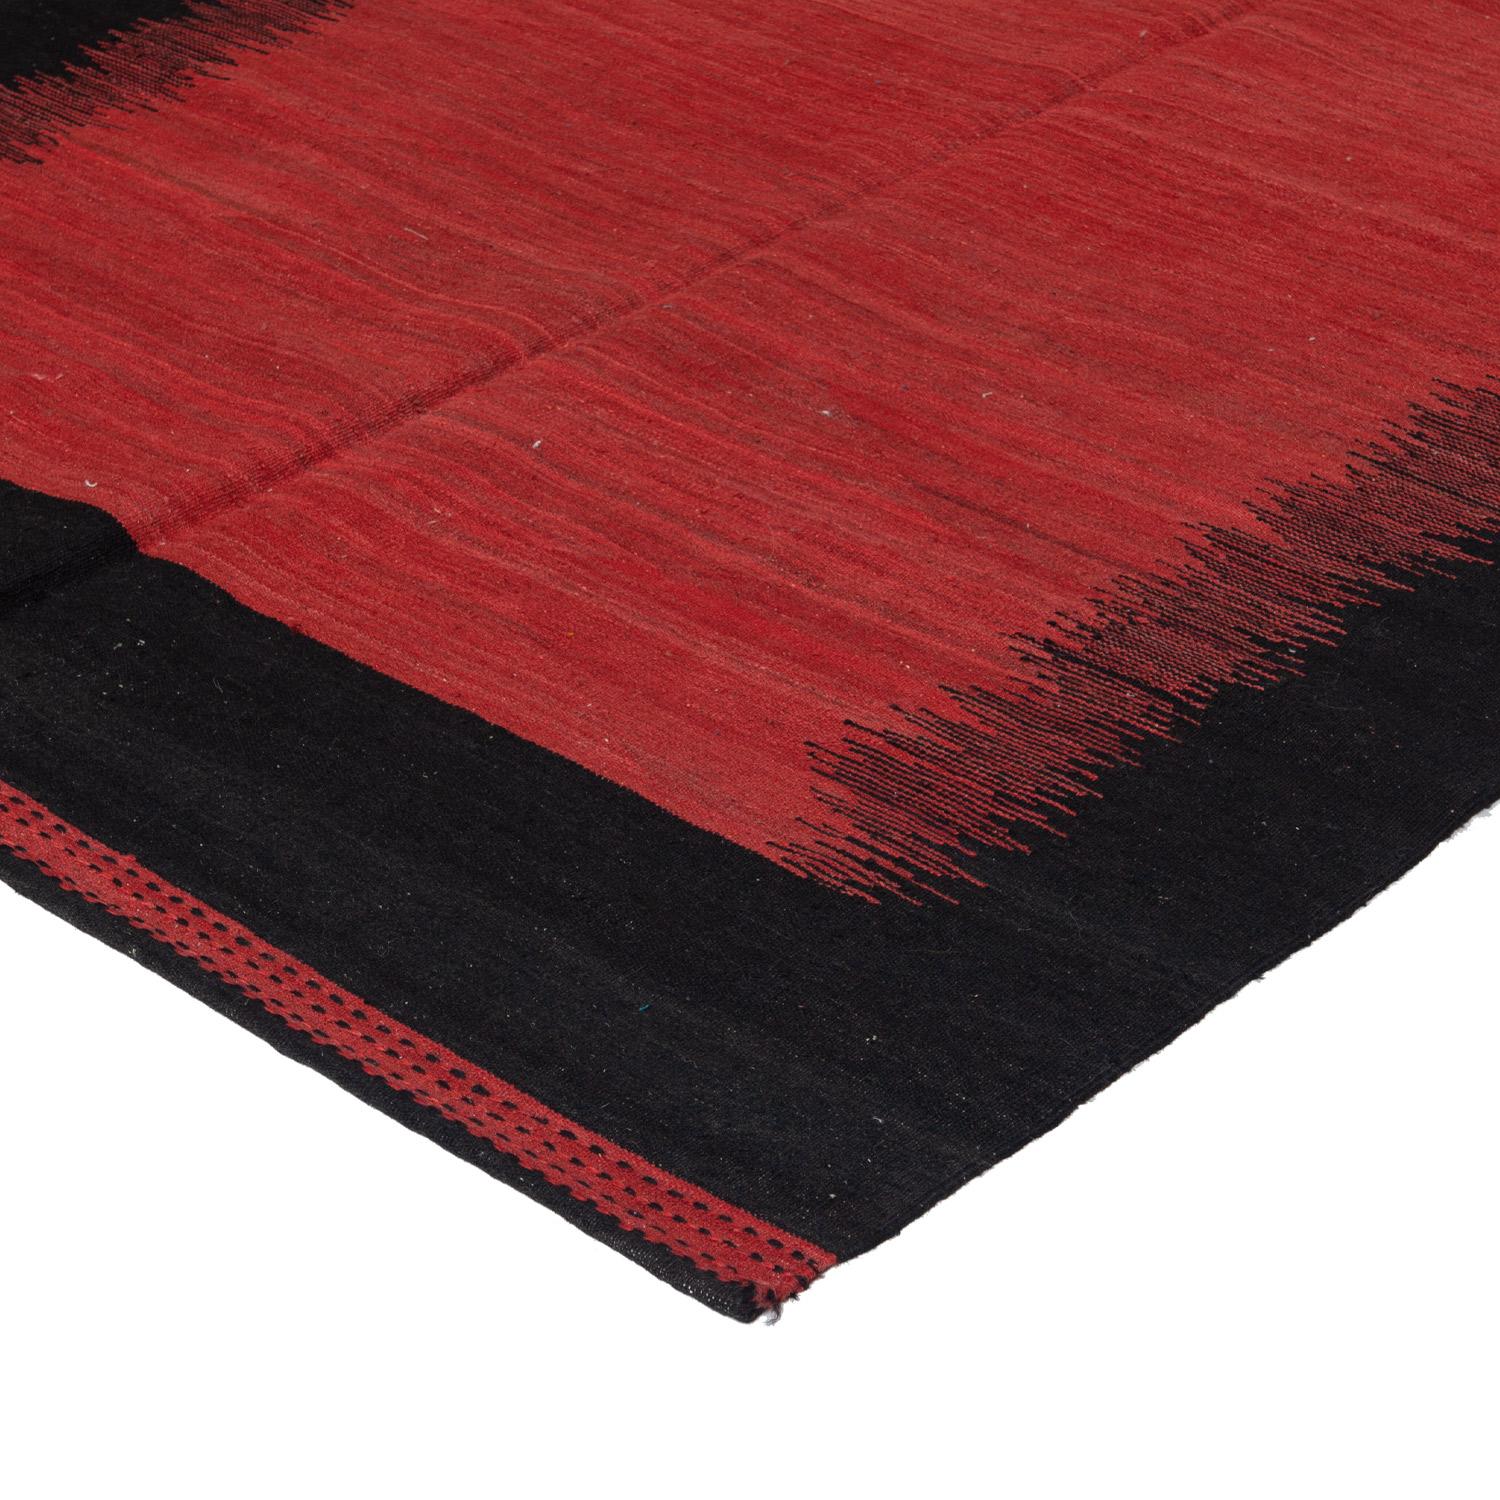 Hand-Knotted abc carpet Red Maza Antique Wool Flatweave Rug - 5'9